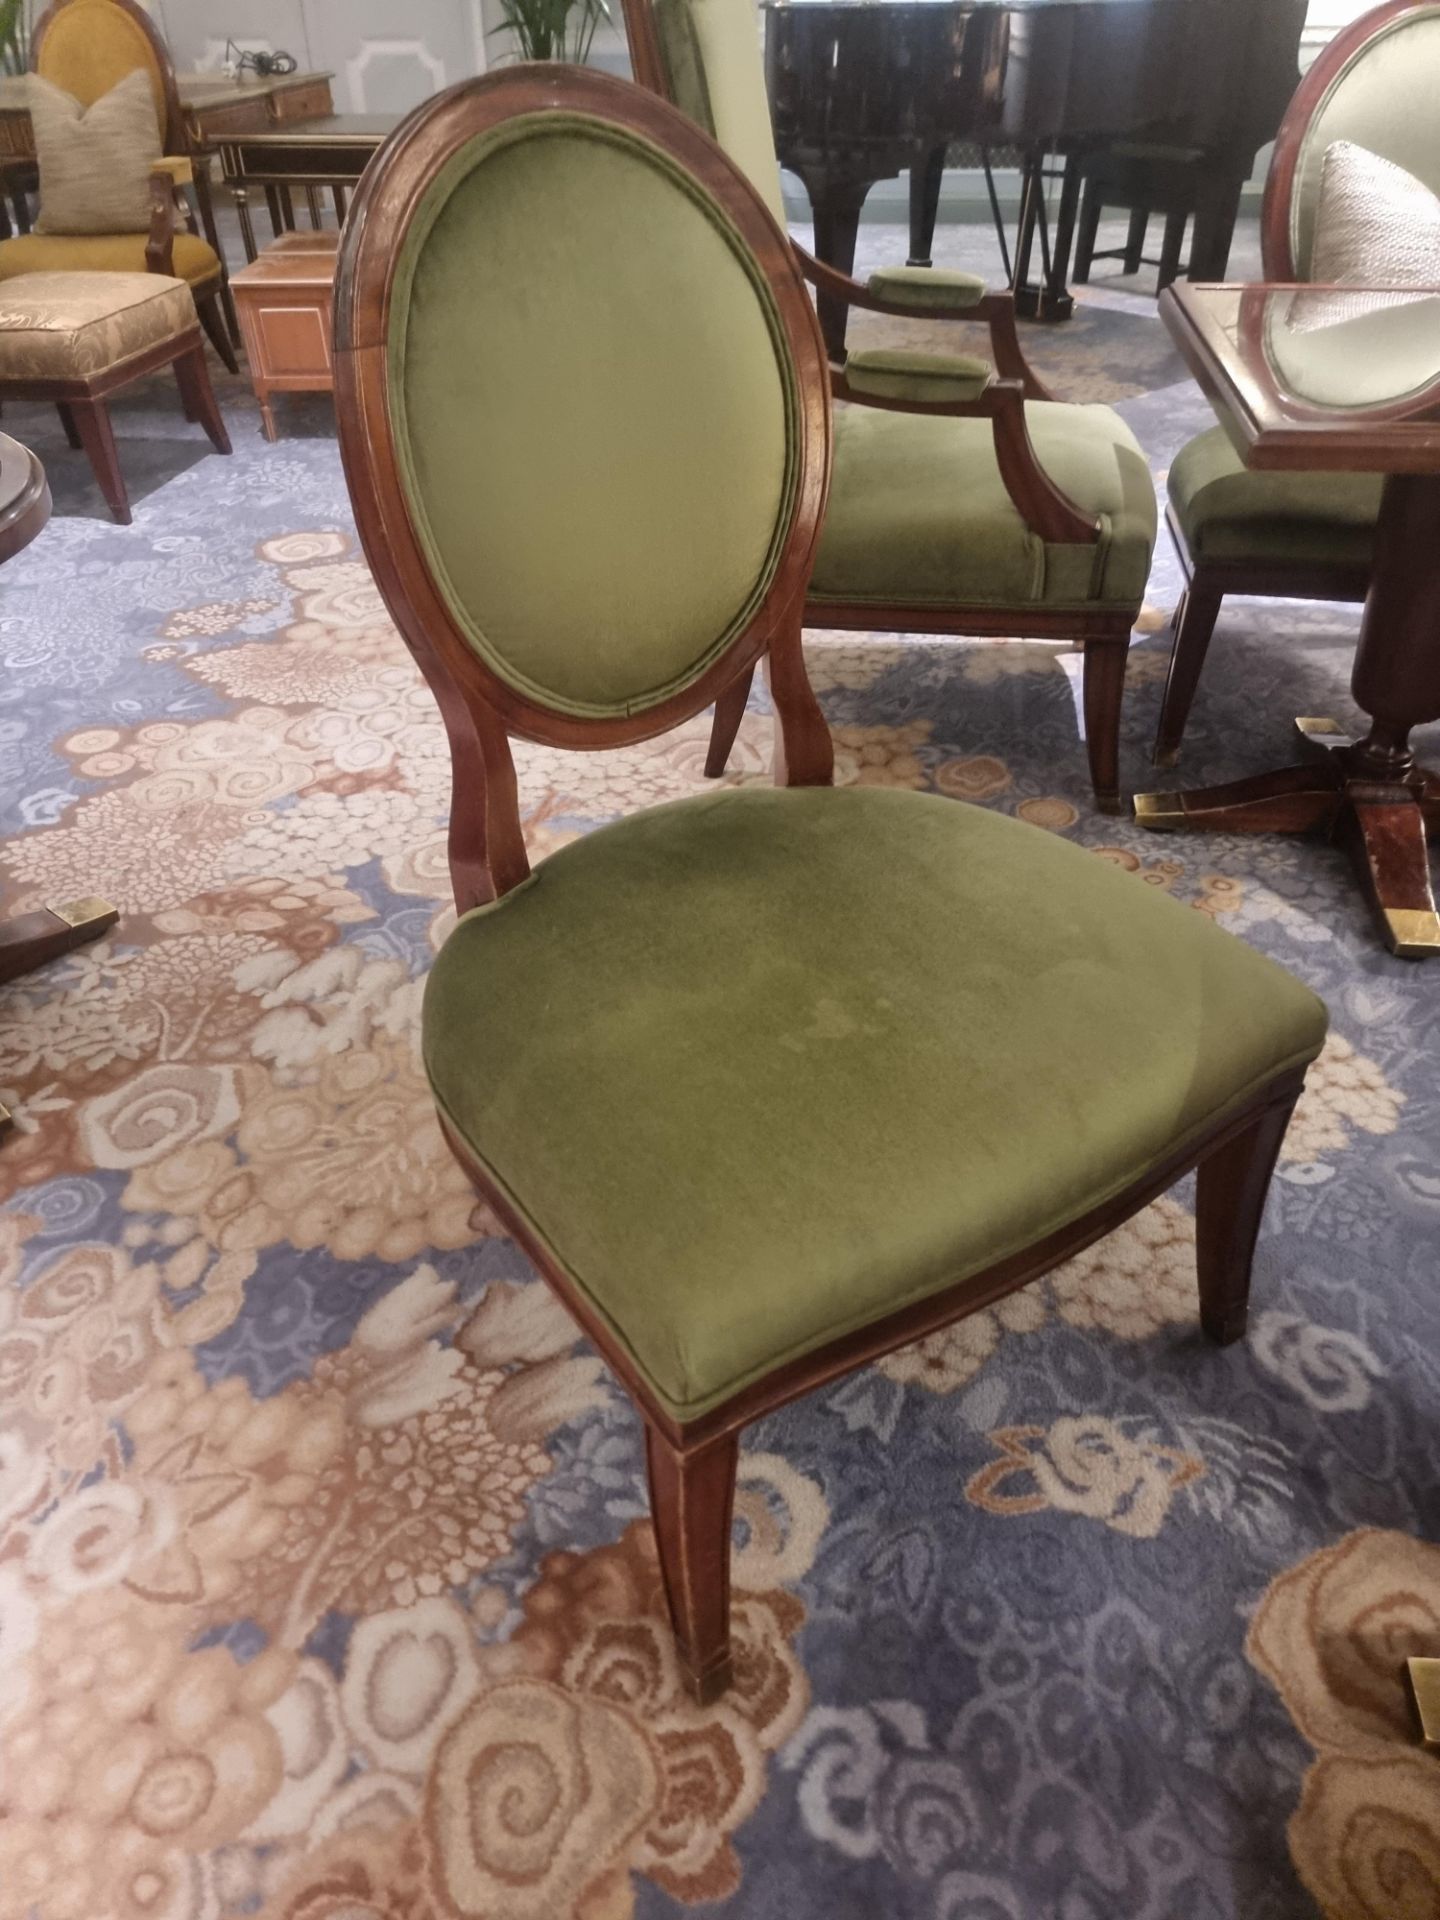 Louis XVI Style Framed And Upholstered Arm Chair In Lelievre Paris Olive Green Salon Chair 68 x 68 x - Image 3 of 5